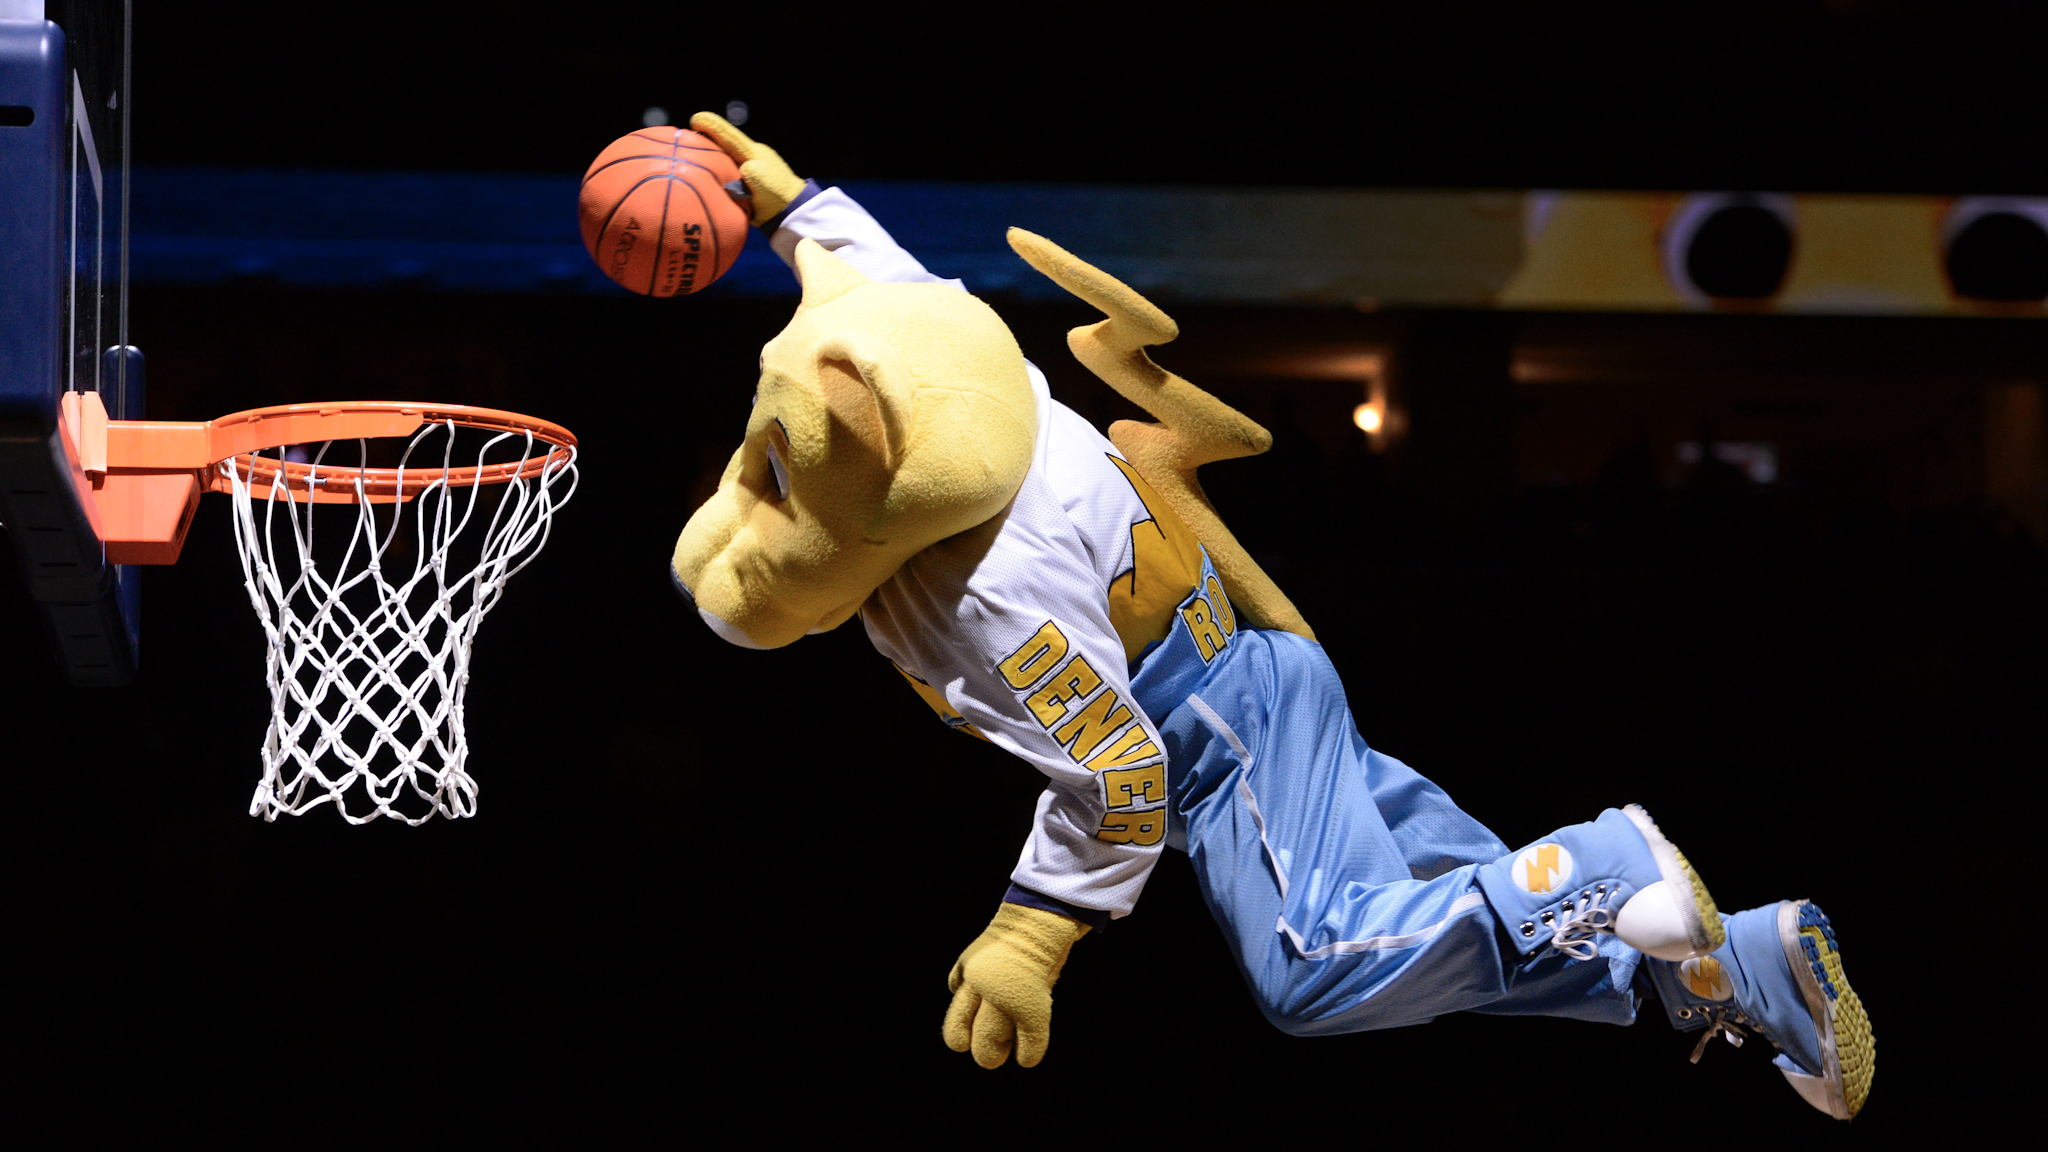 DENVER, CO - MARCH 08: Denver Nuggets mascot does his high flying dunk before the game agains the Denver Nuggets and the New York Knicks March 8, 2016 at Pepsi Center.